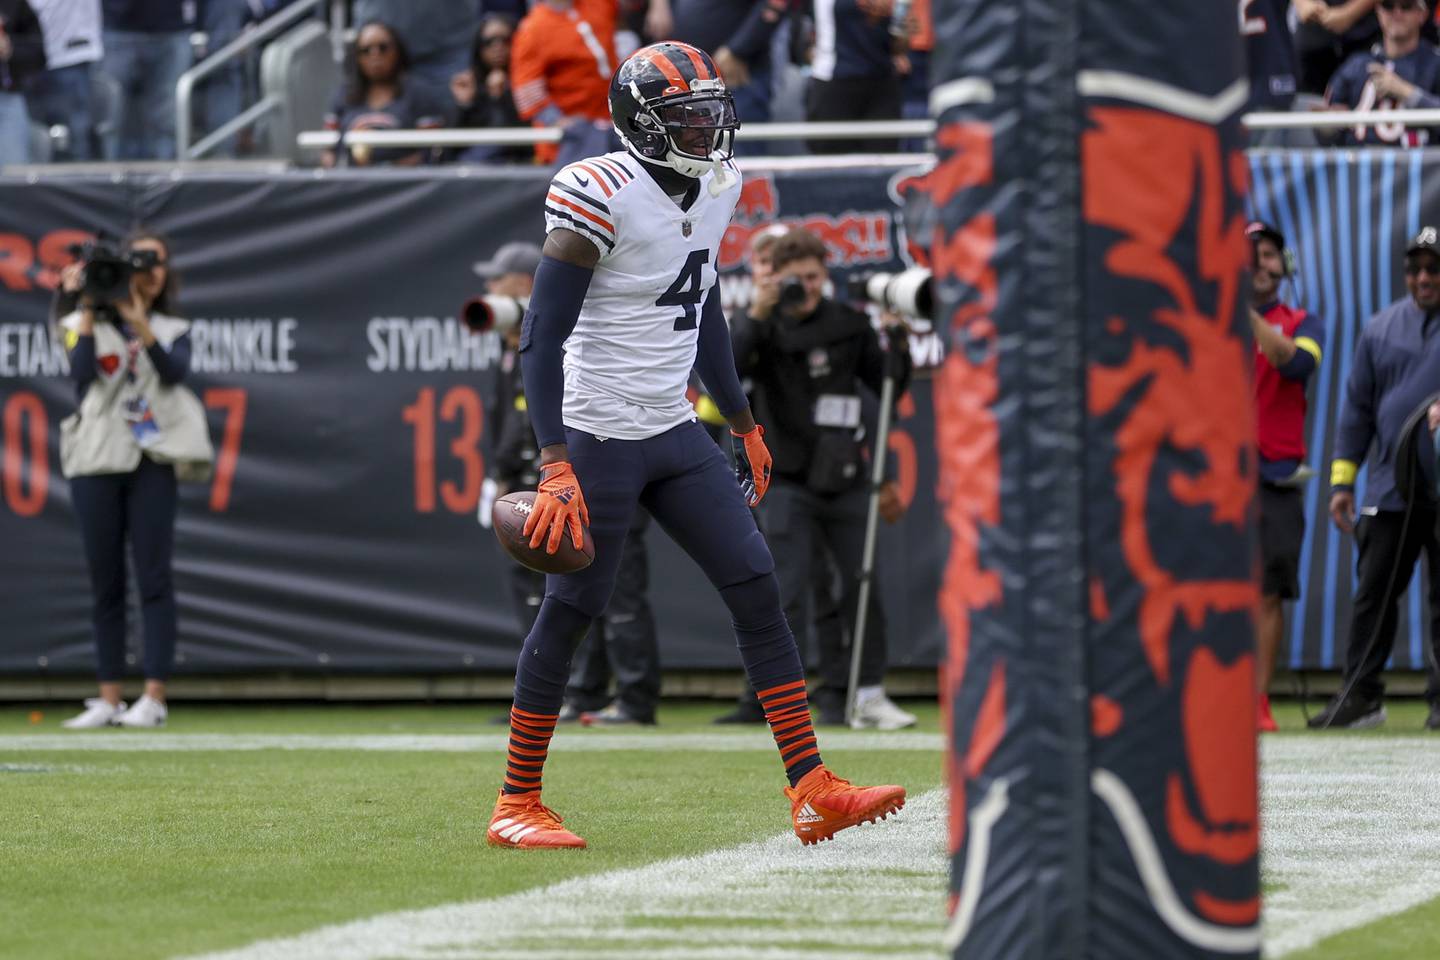 Bears safety Eddie Jackson walks in the end zone after getting an interception during the first quarter against the Texans at Soldier Field on Sept. 25, 2022.